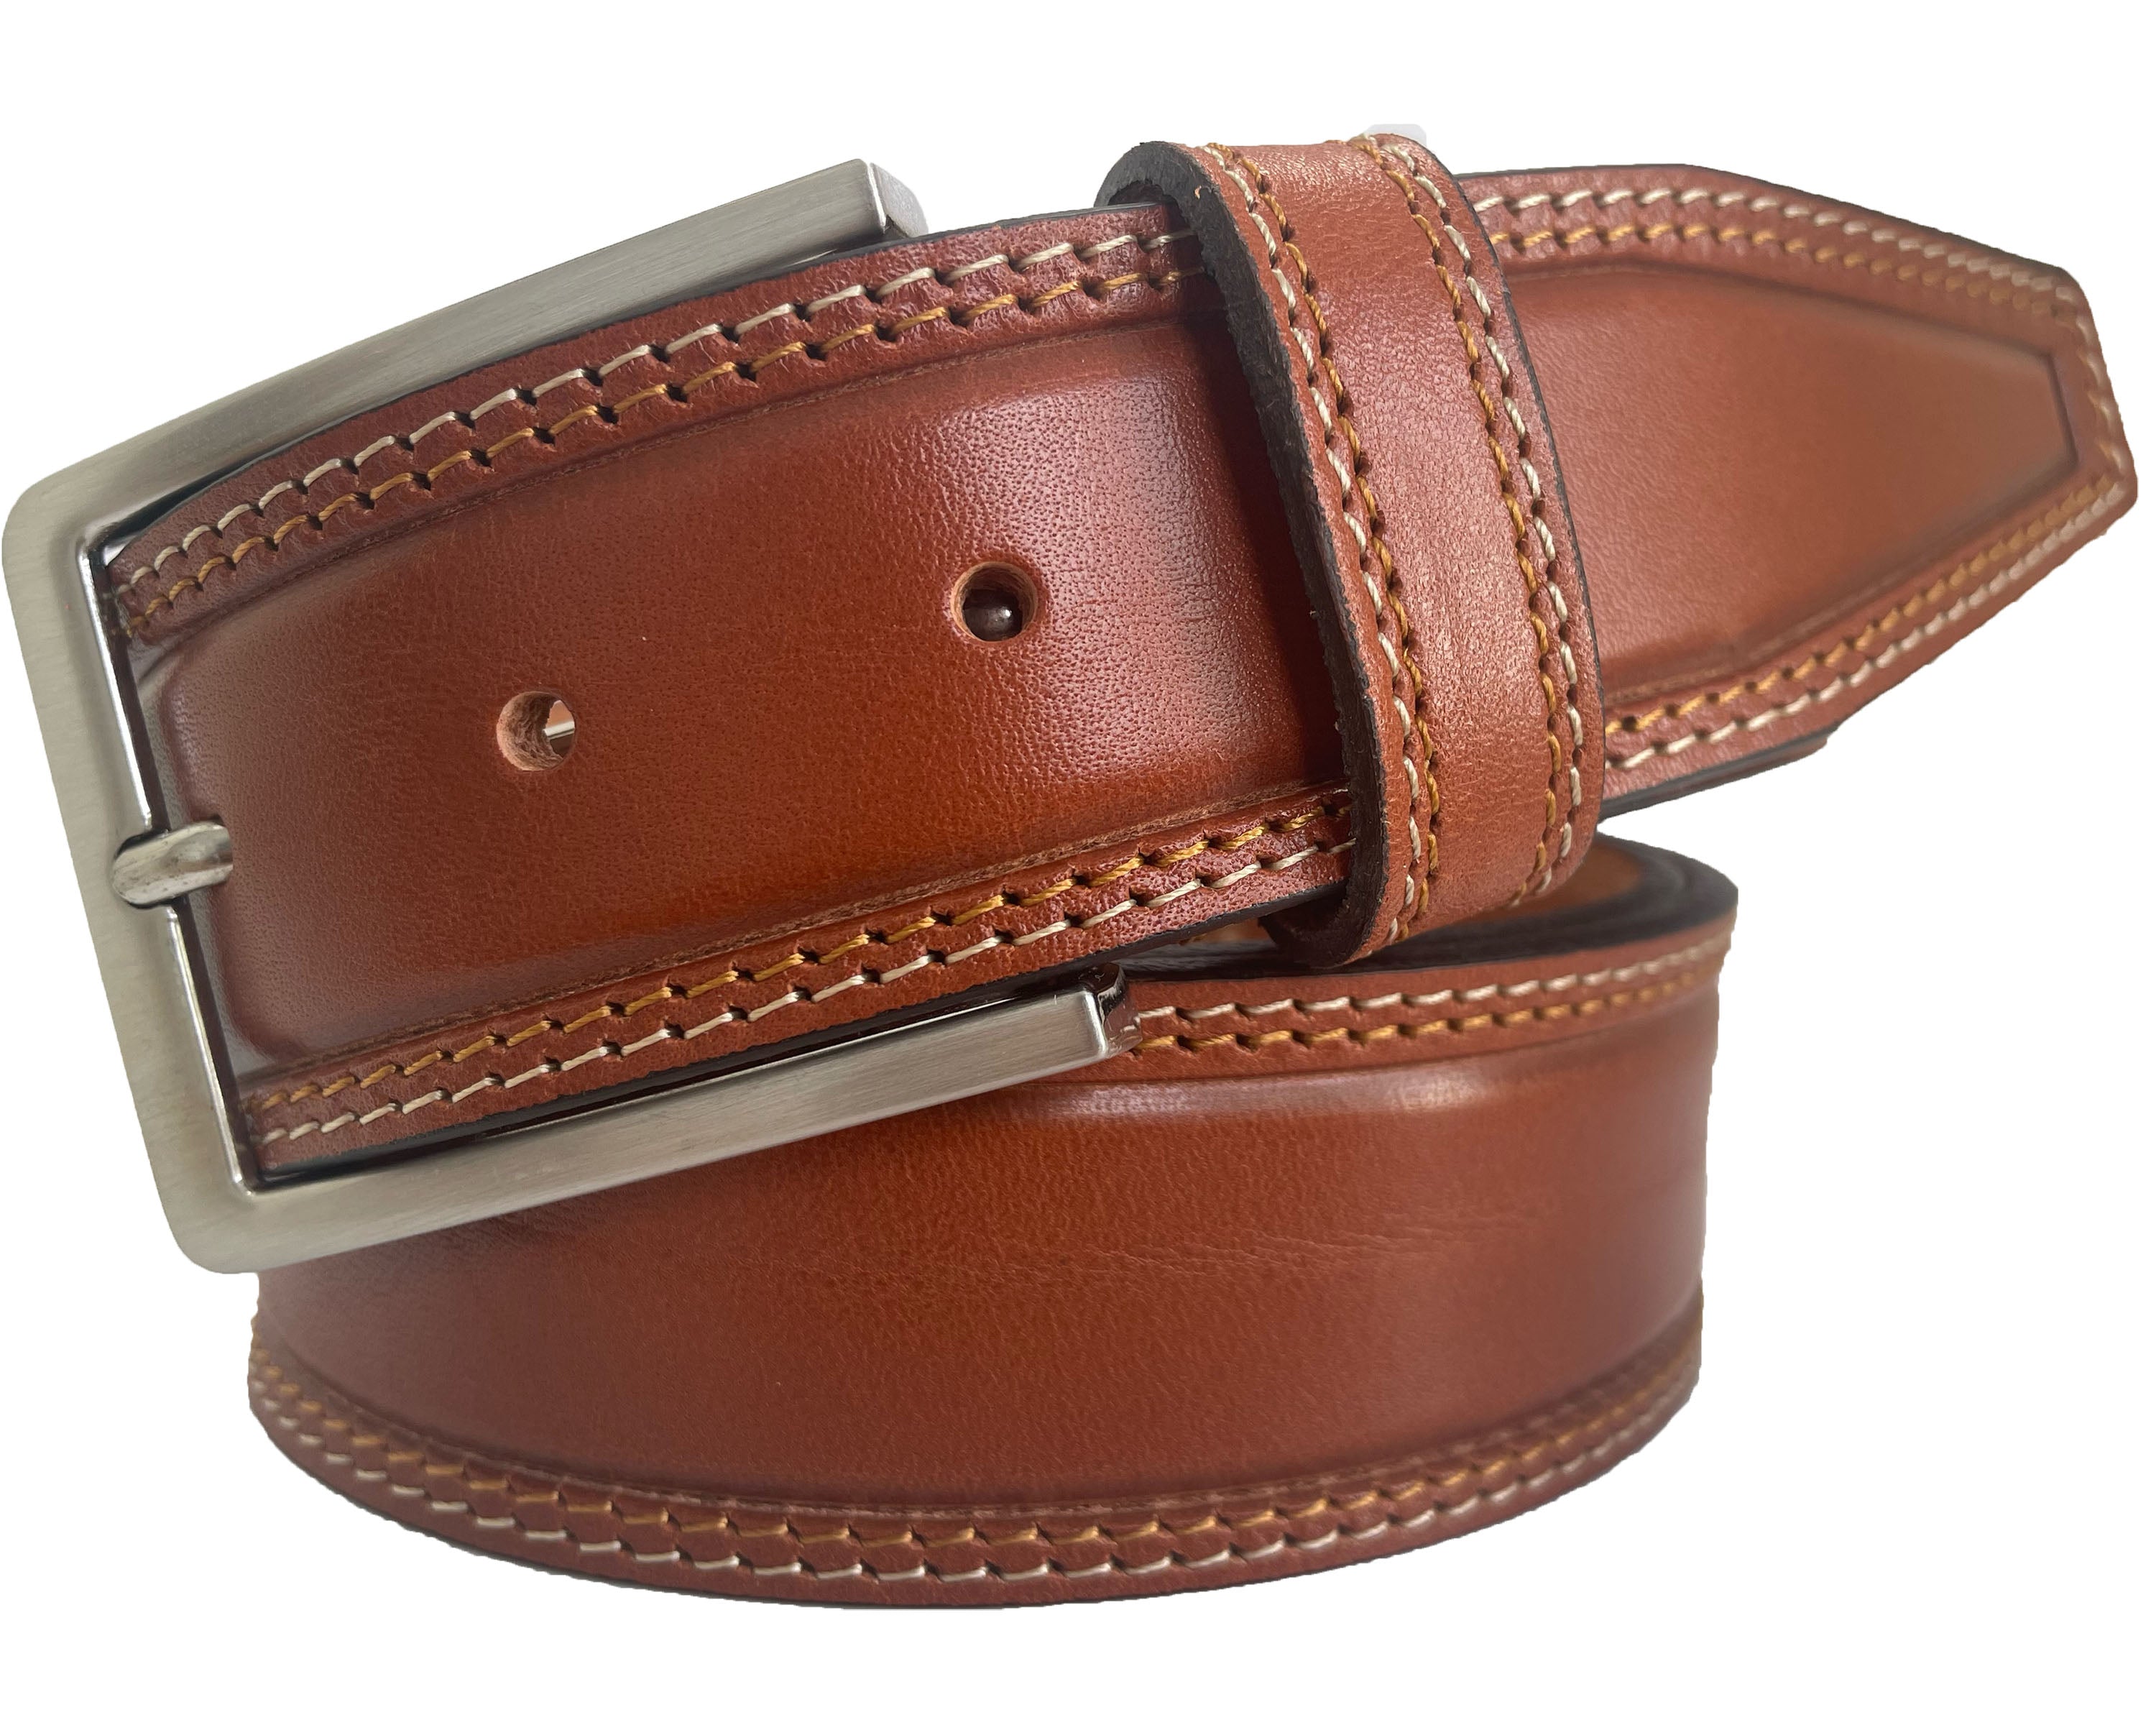 CARAMEL DOUBLE STITCHED 40MM CLASSIC HIDE LEATHER BELT